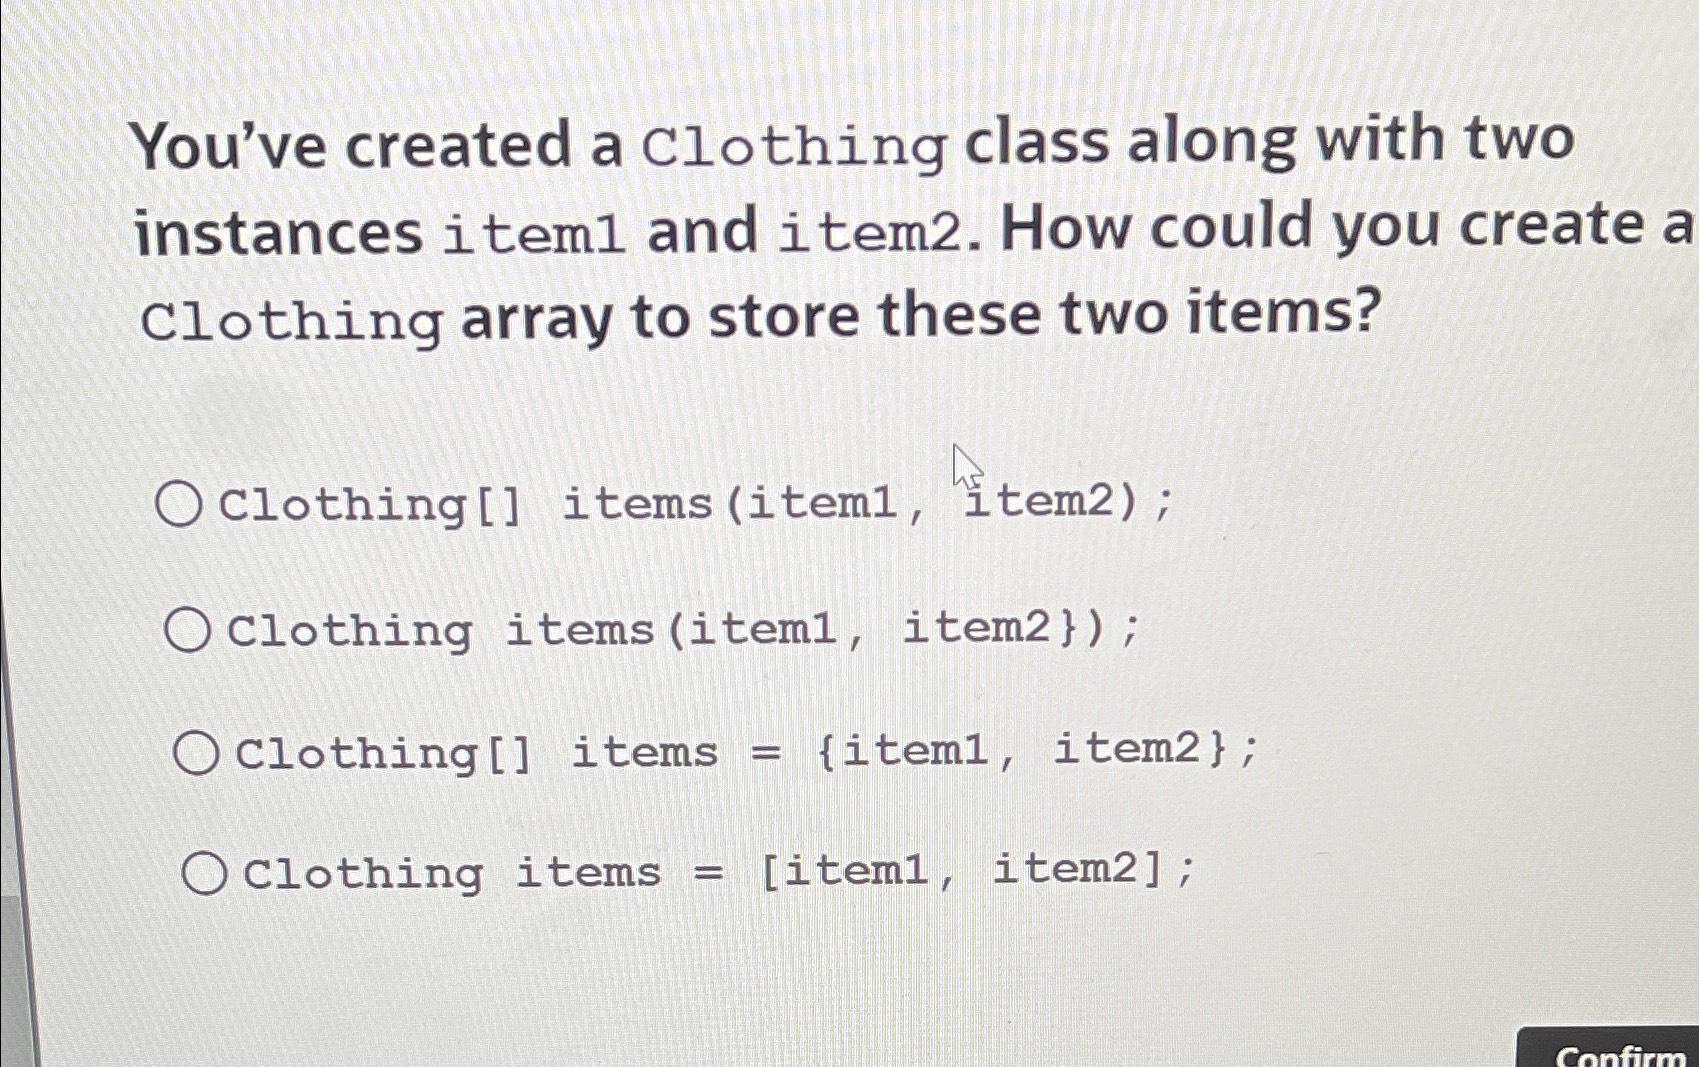 You've created a Clothing class along with two instances item1 and item2. How could you create a Clothing